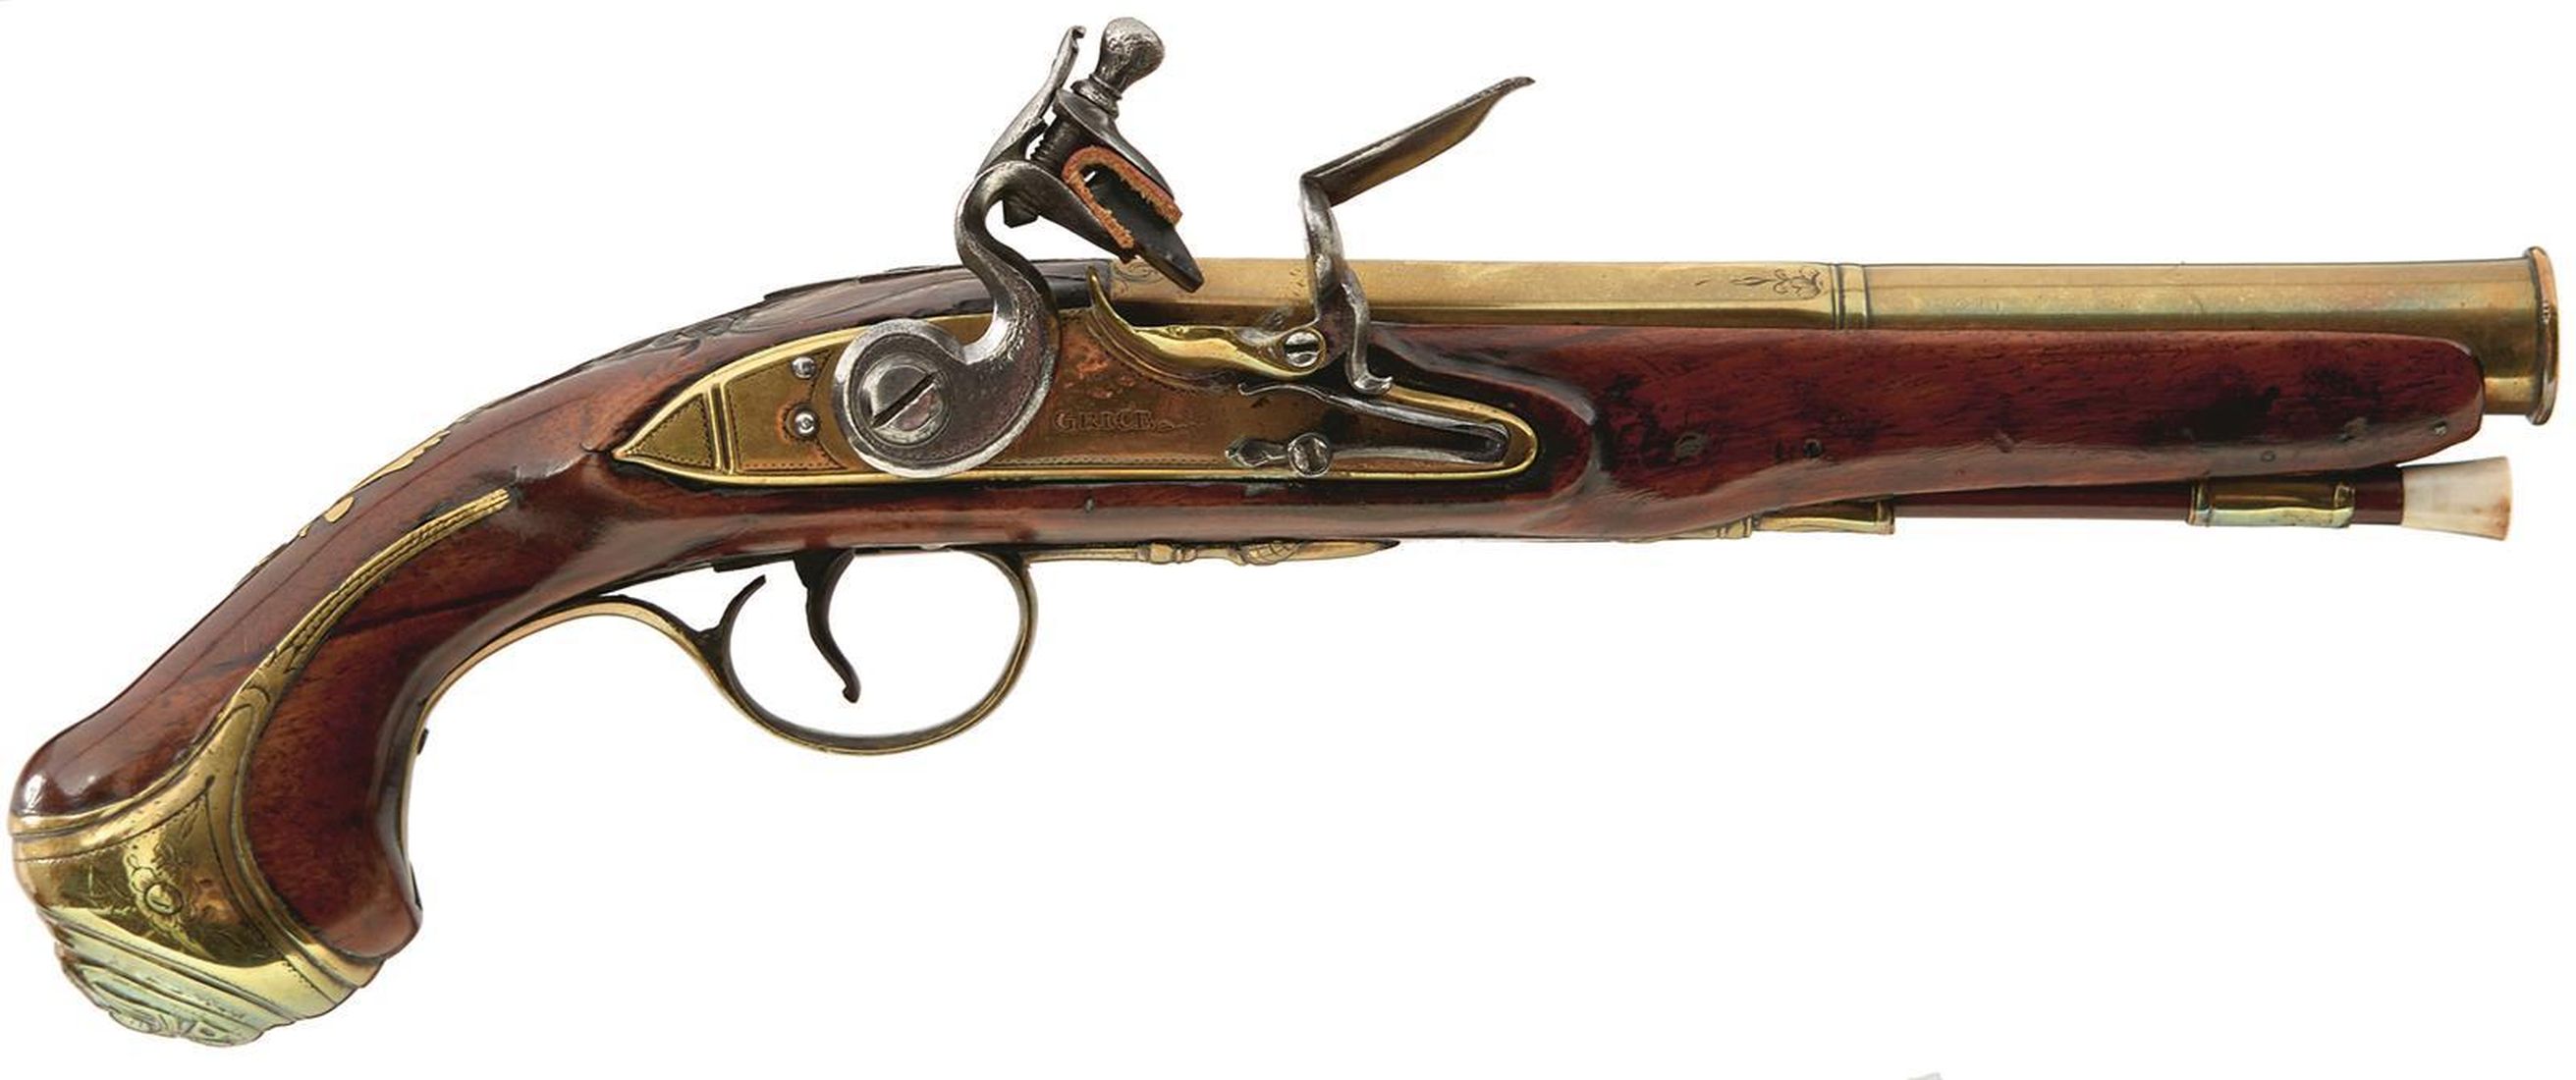 AN 18-BORE FLINTLOCK BRASS BARRELLED HOLSTER PISTOL BY GRICE, 7.25inch two-stage barrel with ring